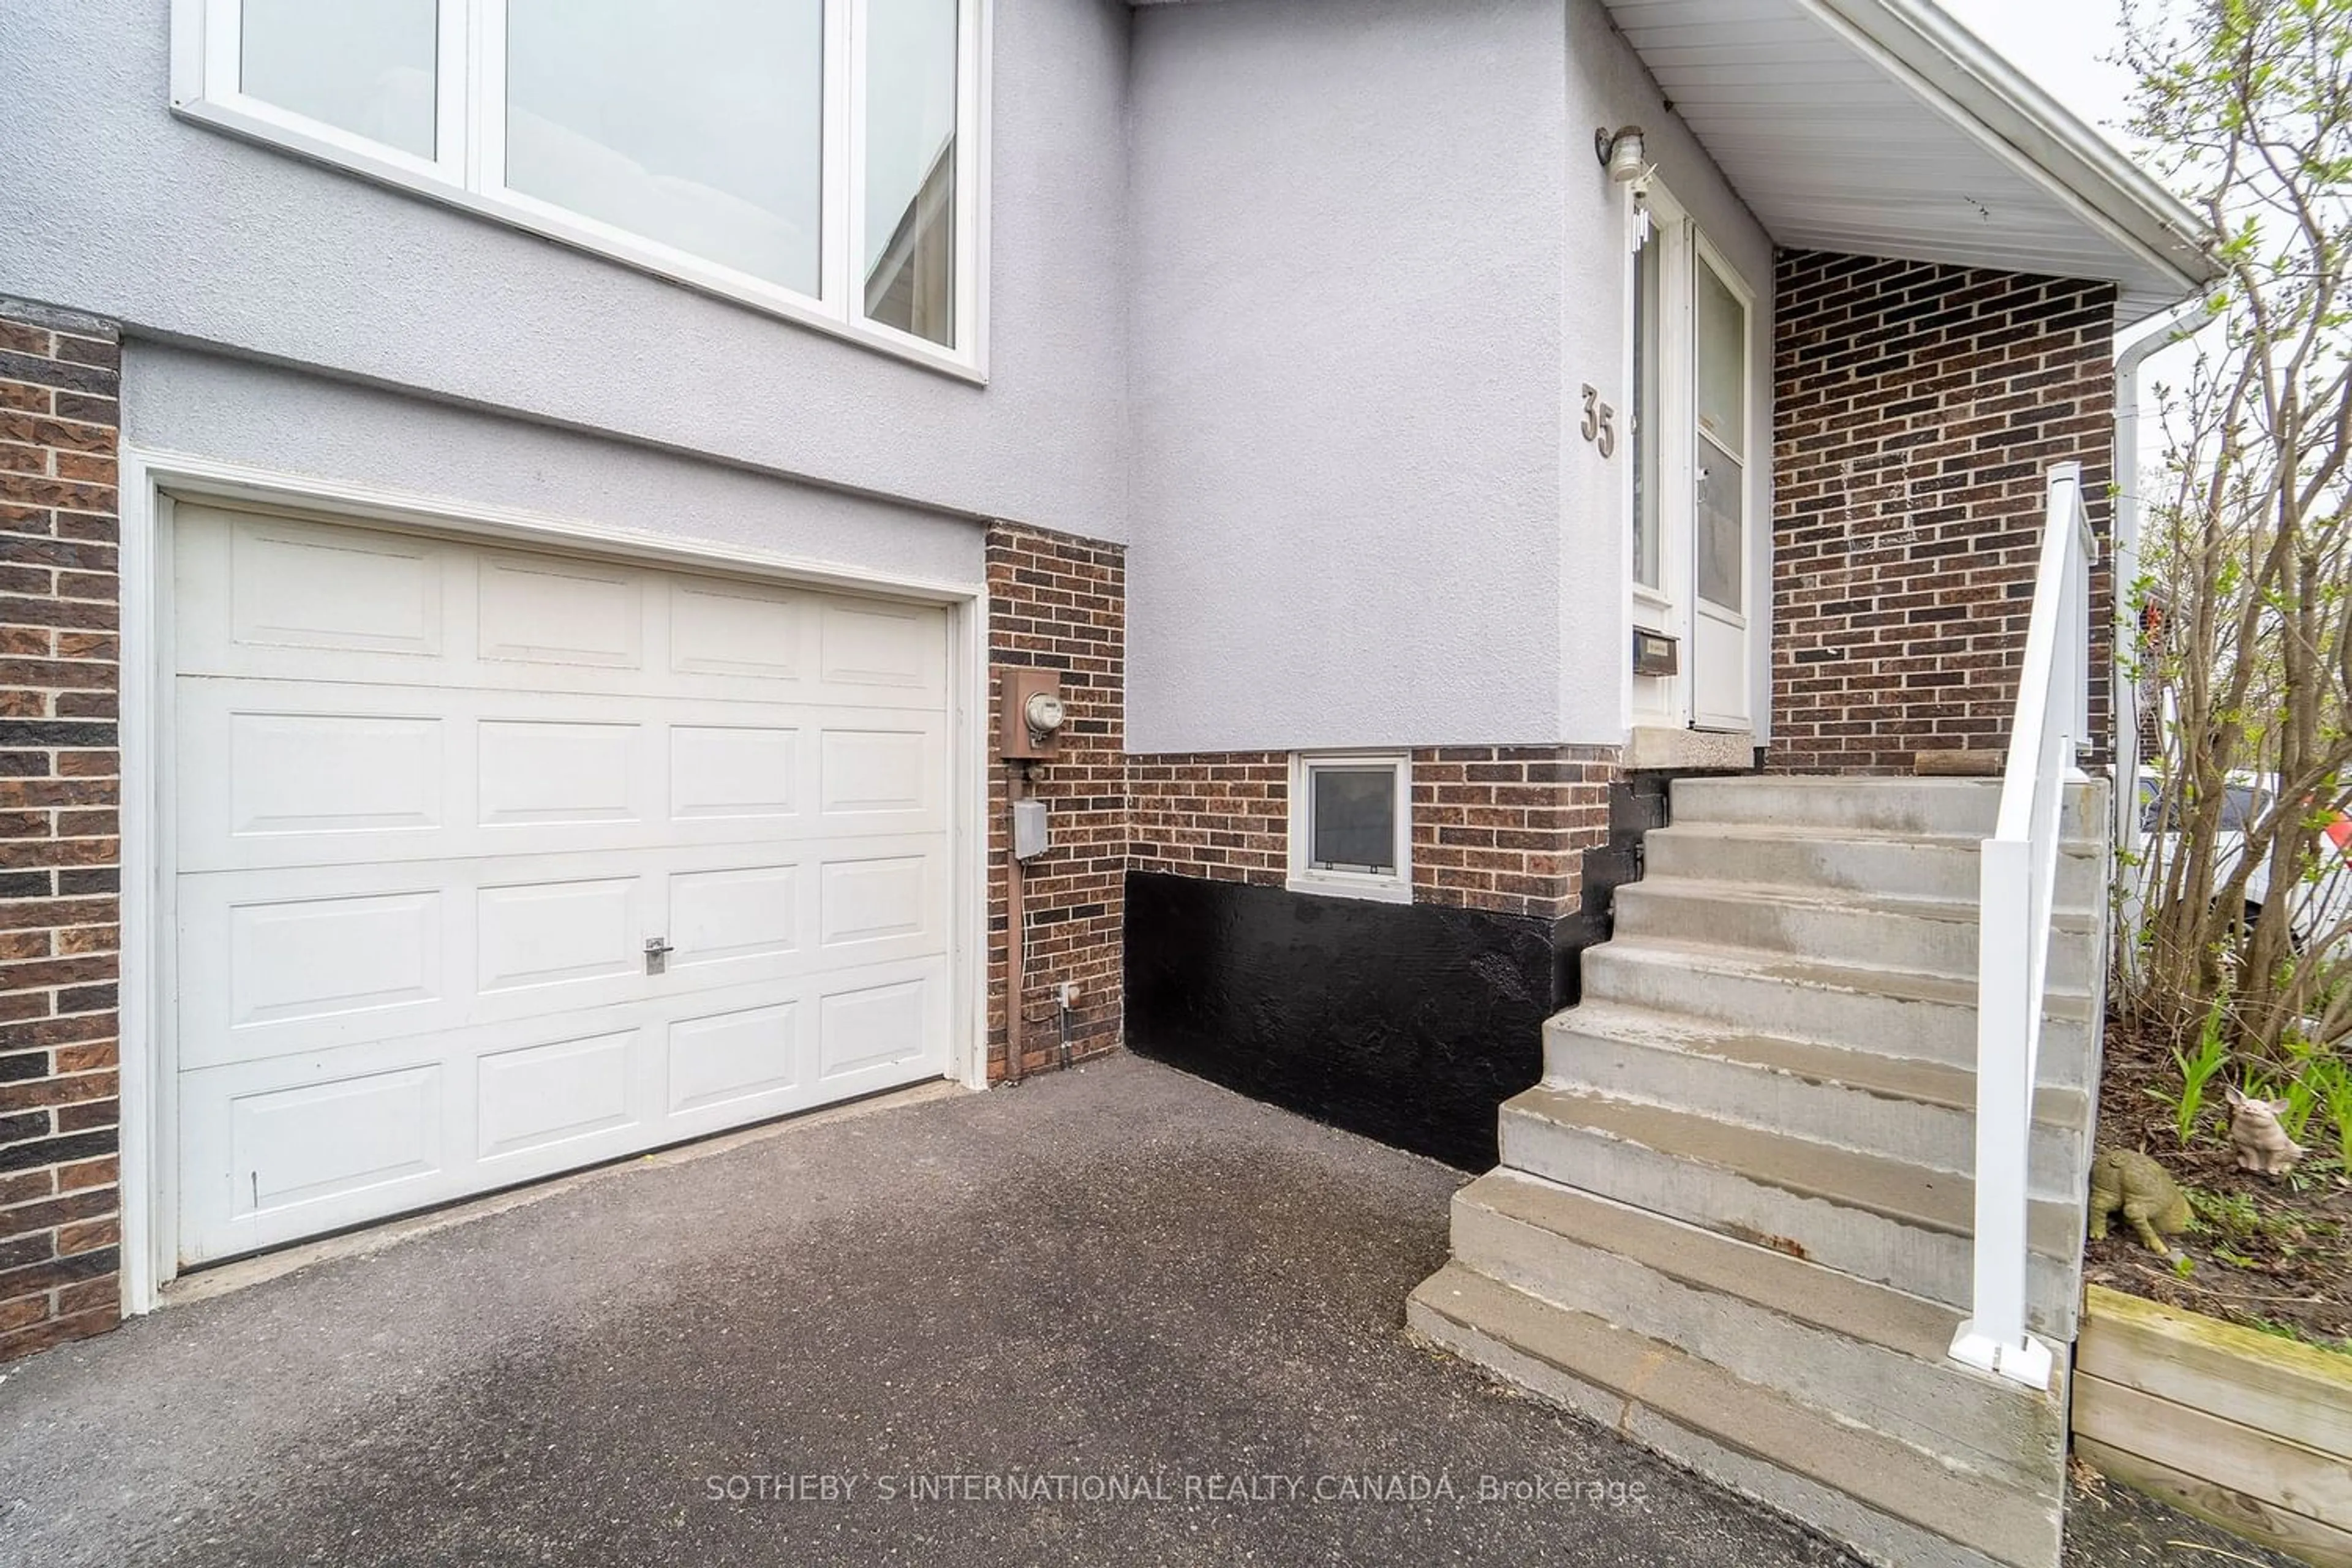 Indoor entryway for 311 Garden St #35, Whitby Ontario L1N 3W3